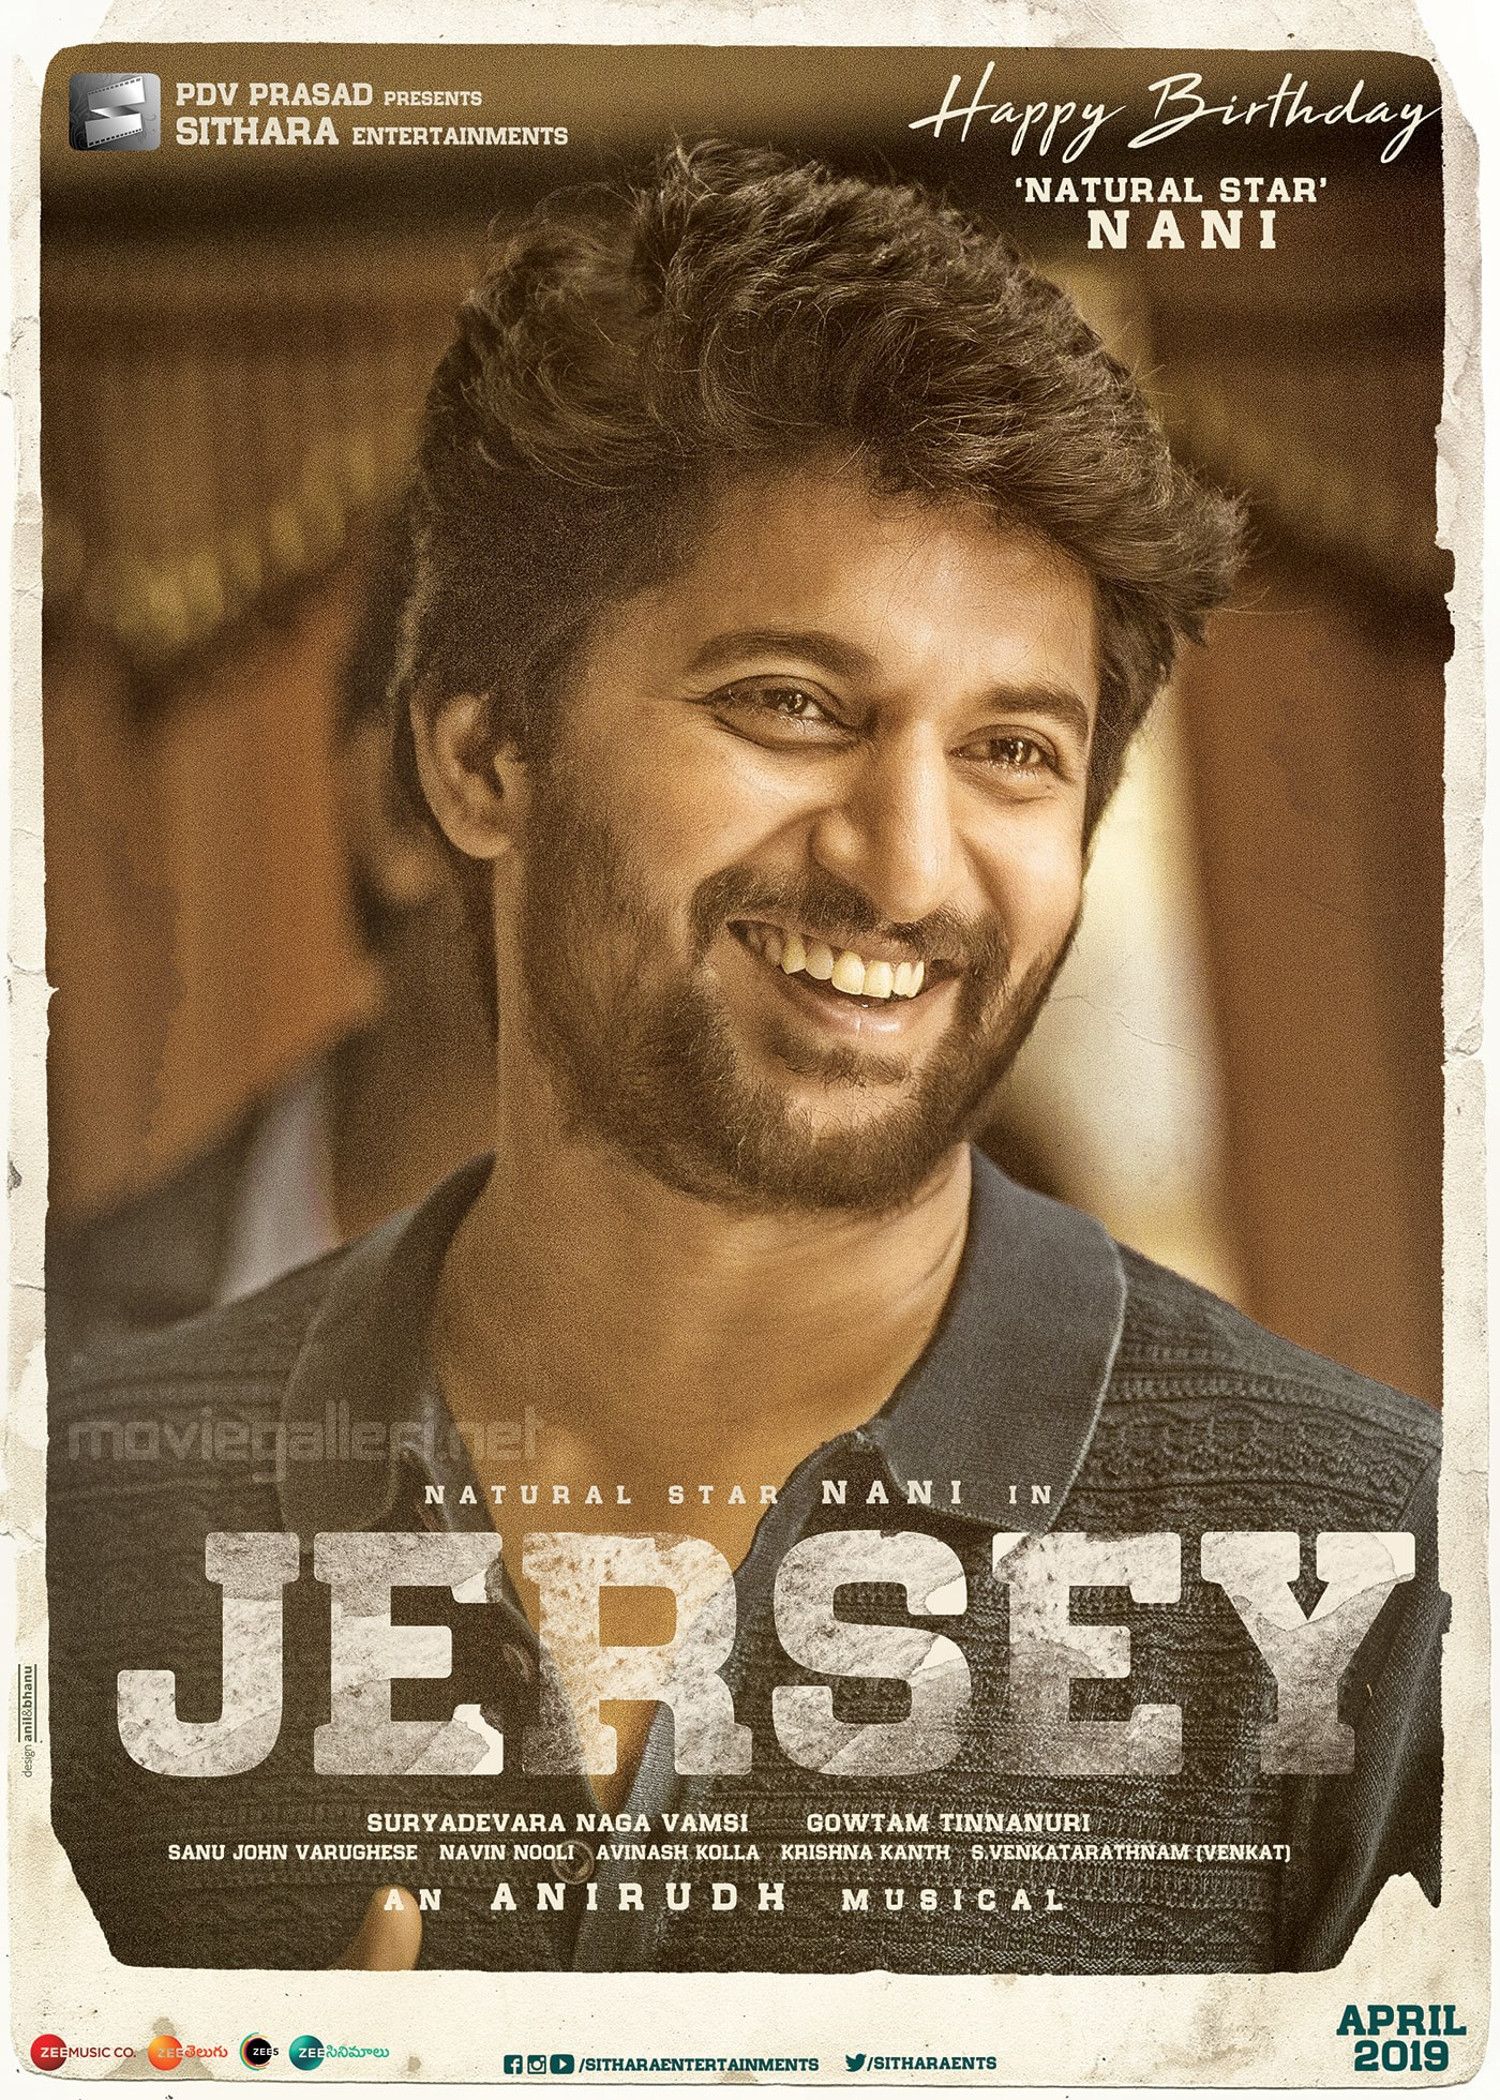 Jersey Movie Nani Birthday Wishes Posters. New Movie Posters